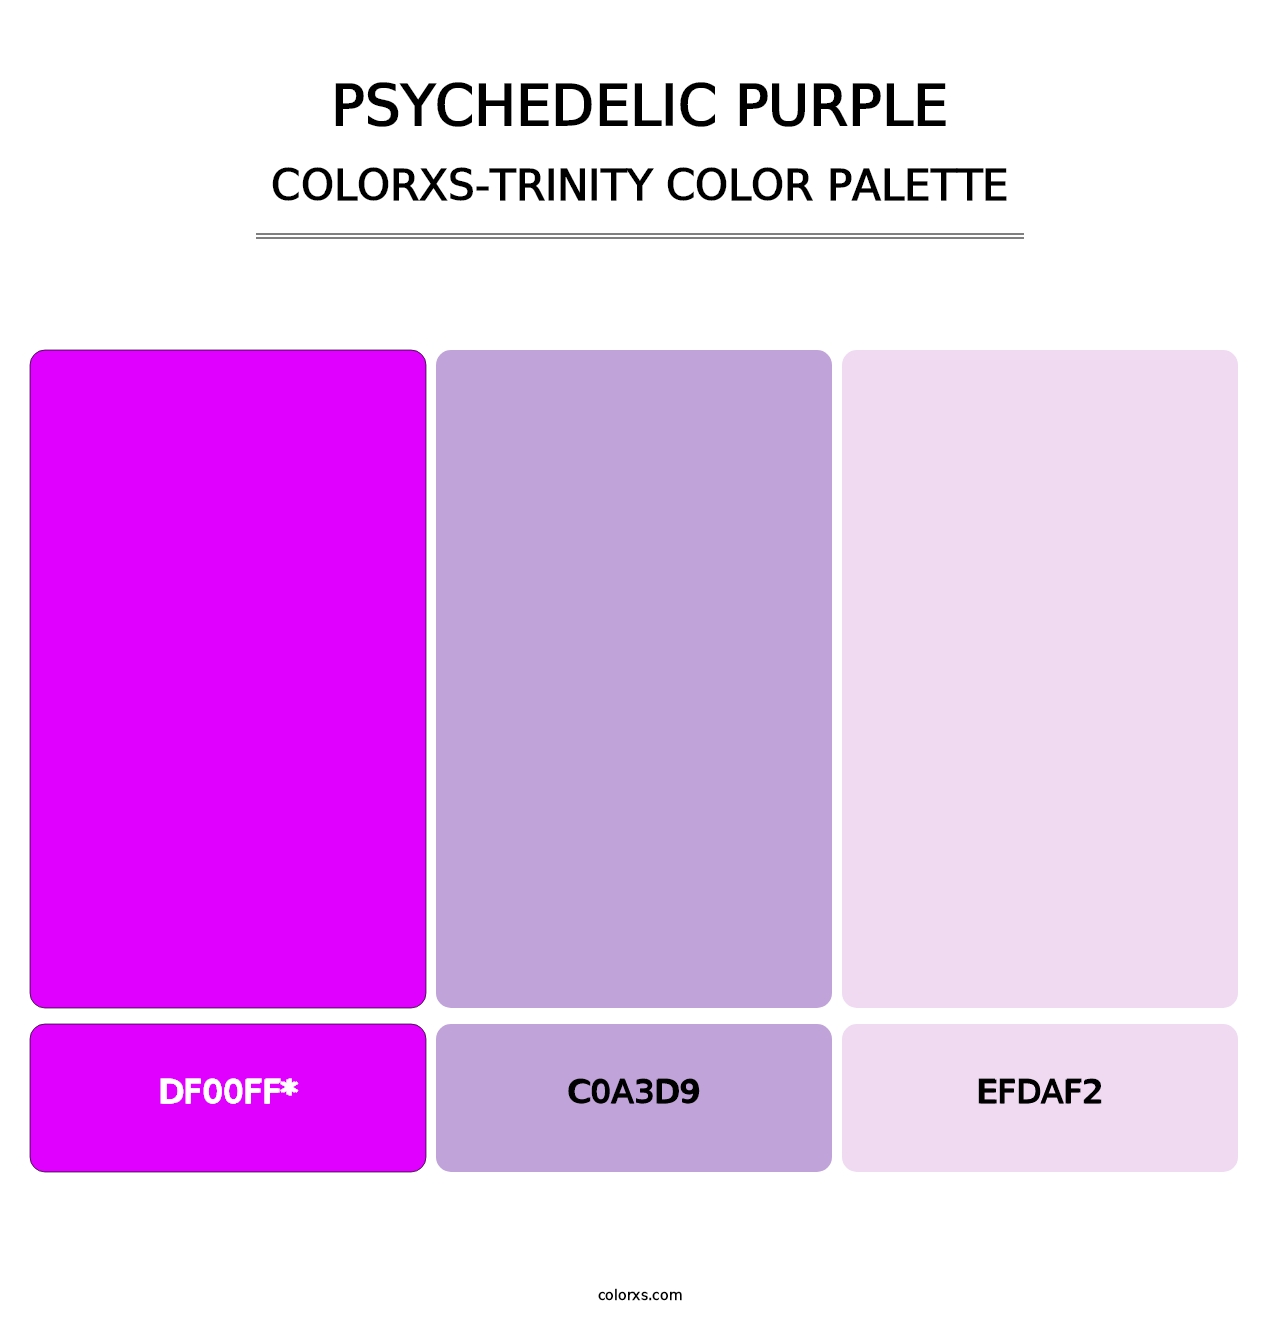 Psychedelic Purple - Colorxs Trinity Palette